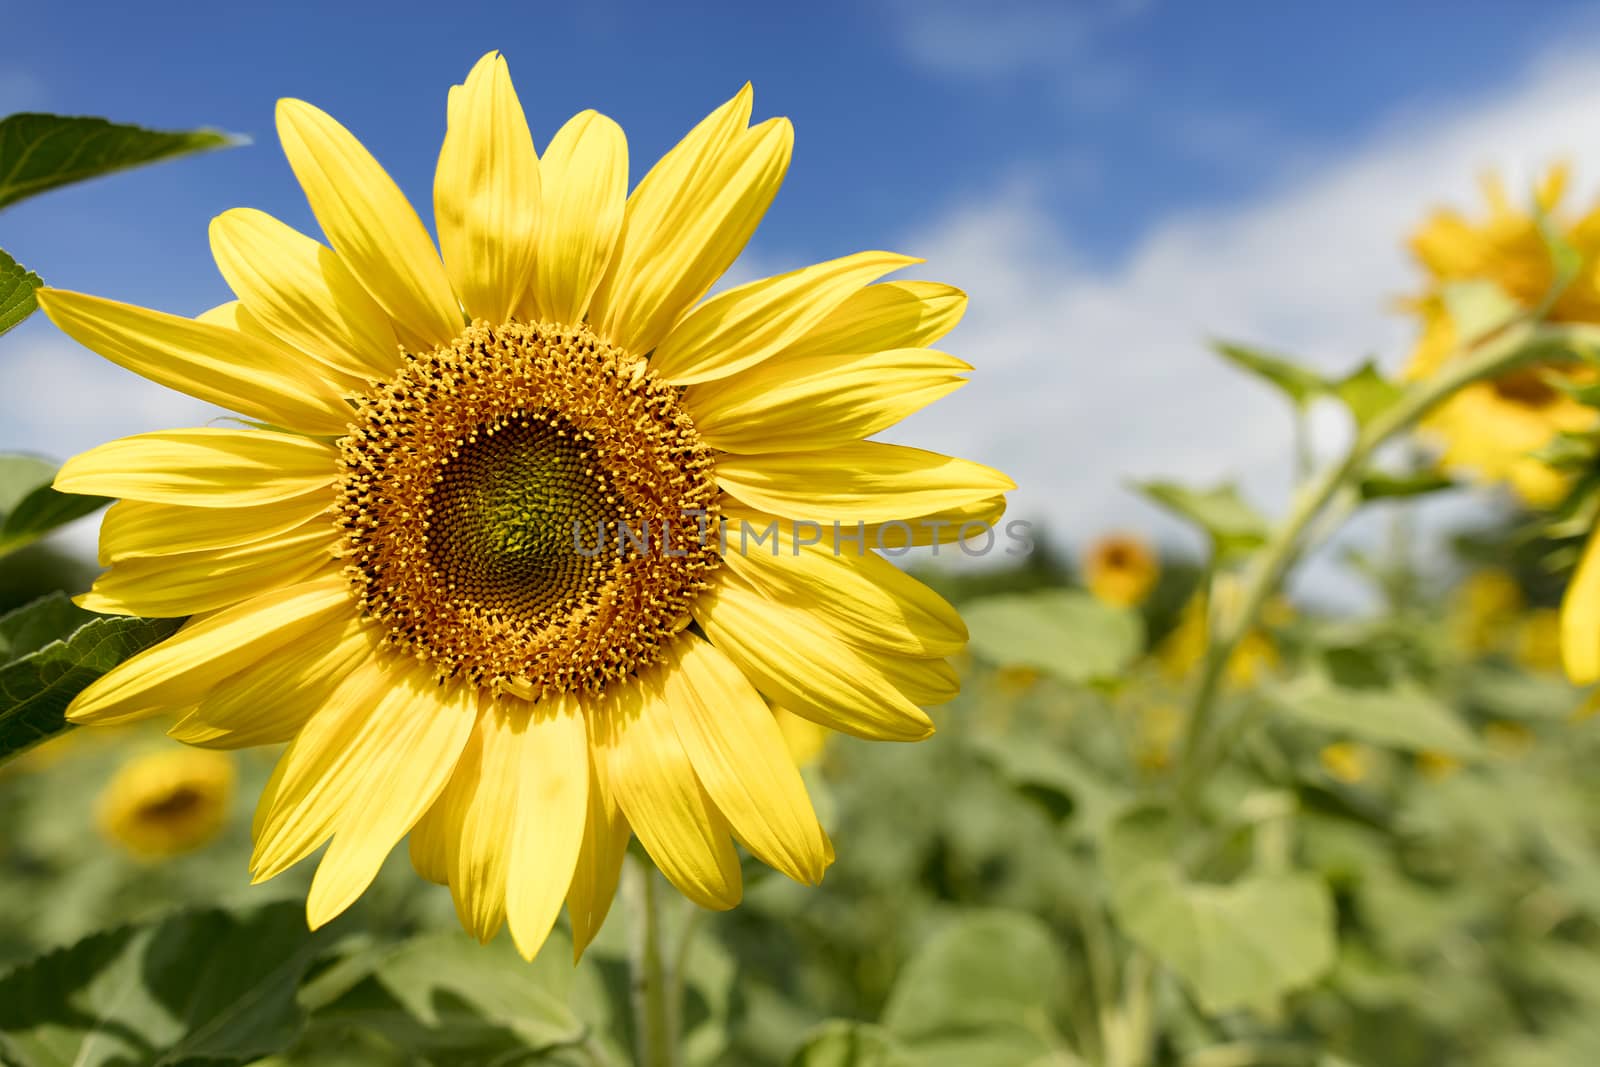 Large and bright blooming sunflower against the blue sky and green field